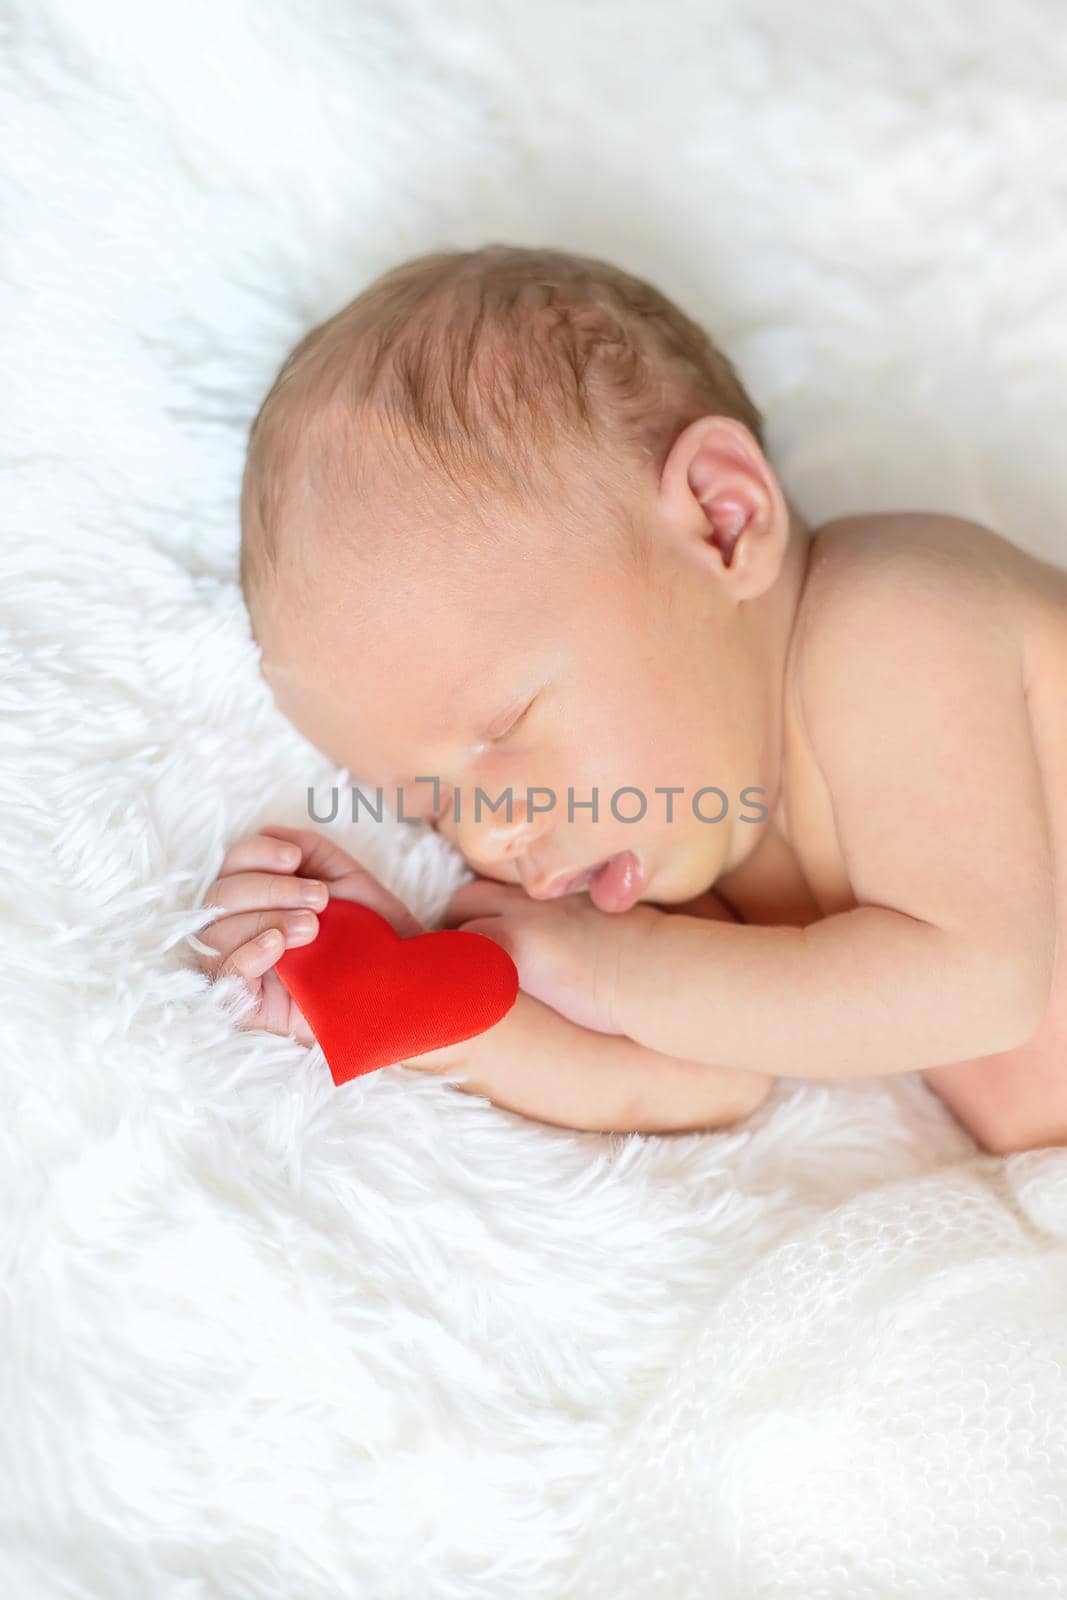 Newborn baby with heart in hand. Selective focus. people.